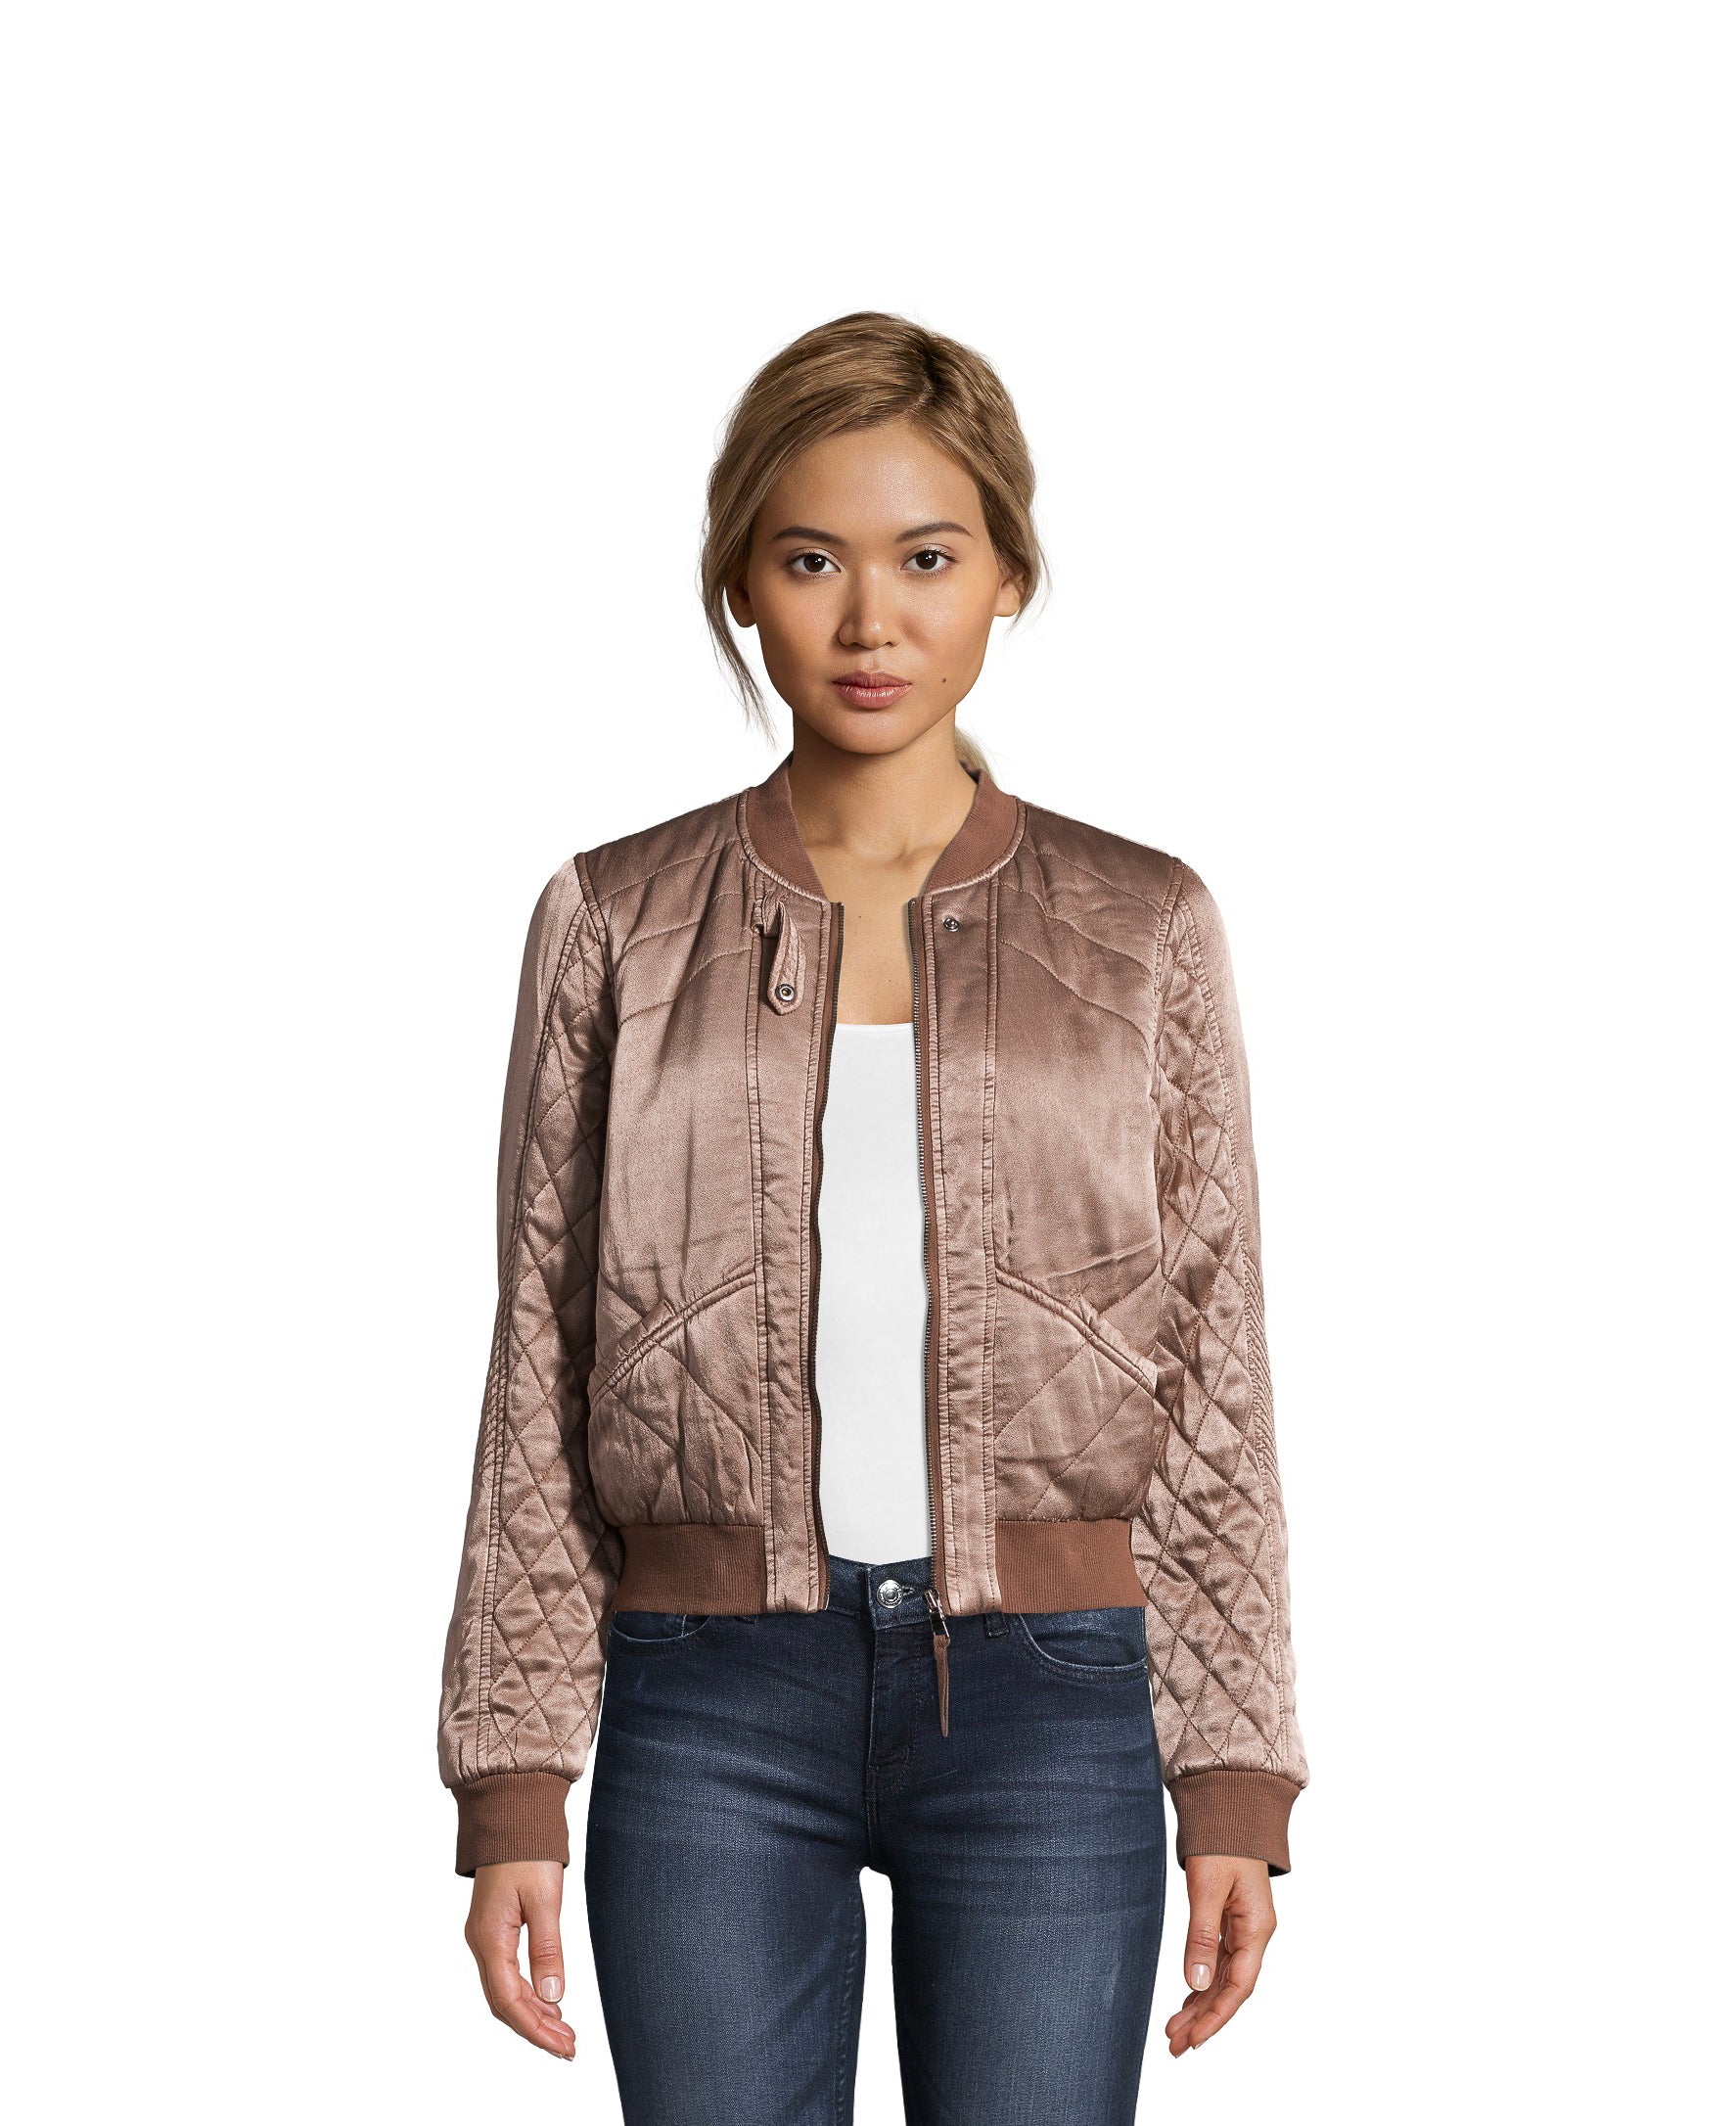 Maiya Quilted Sateen Jacket - Marrakech Clothing